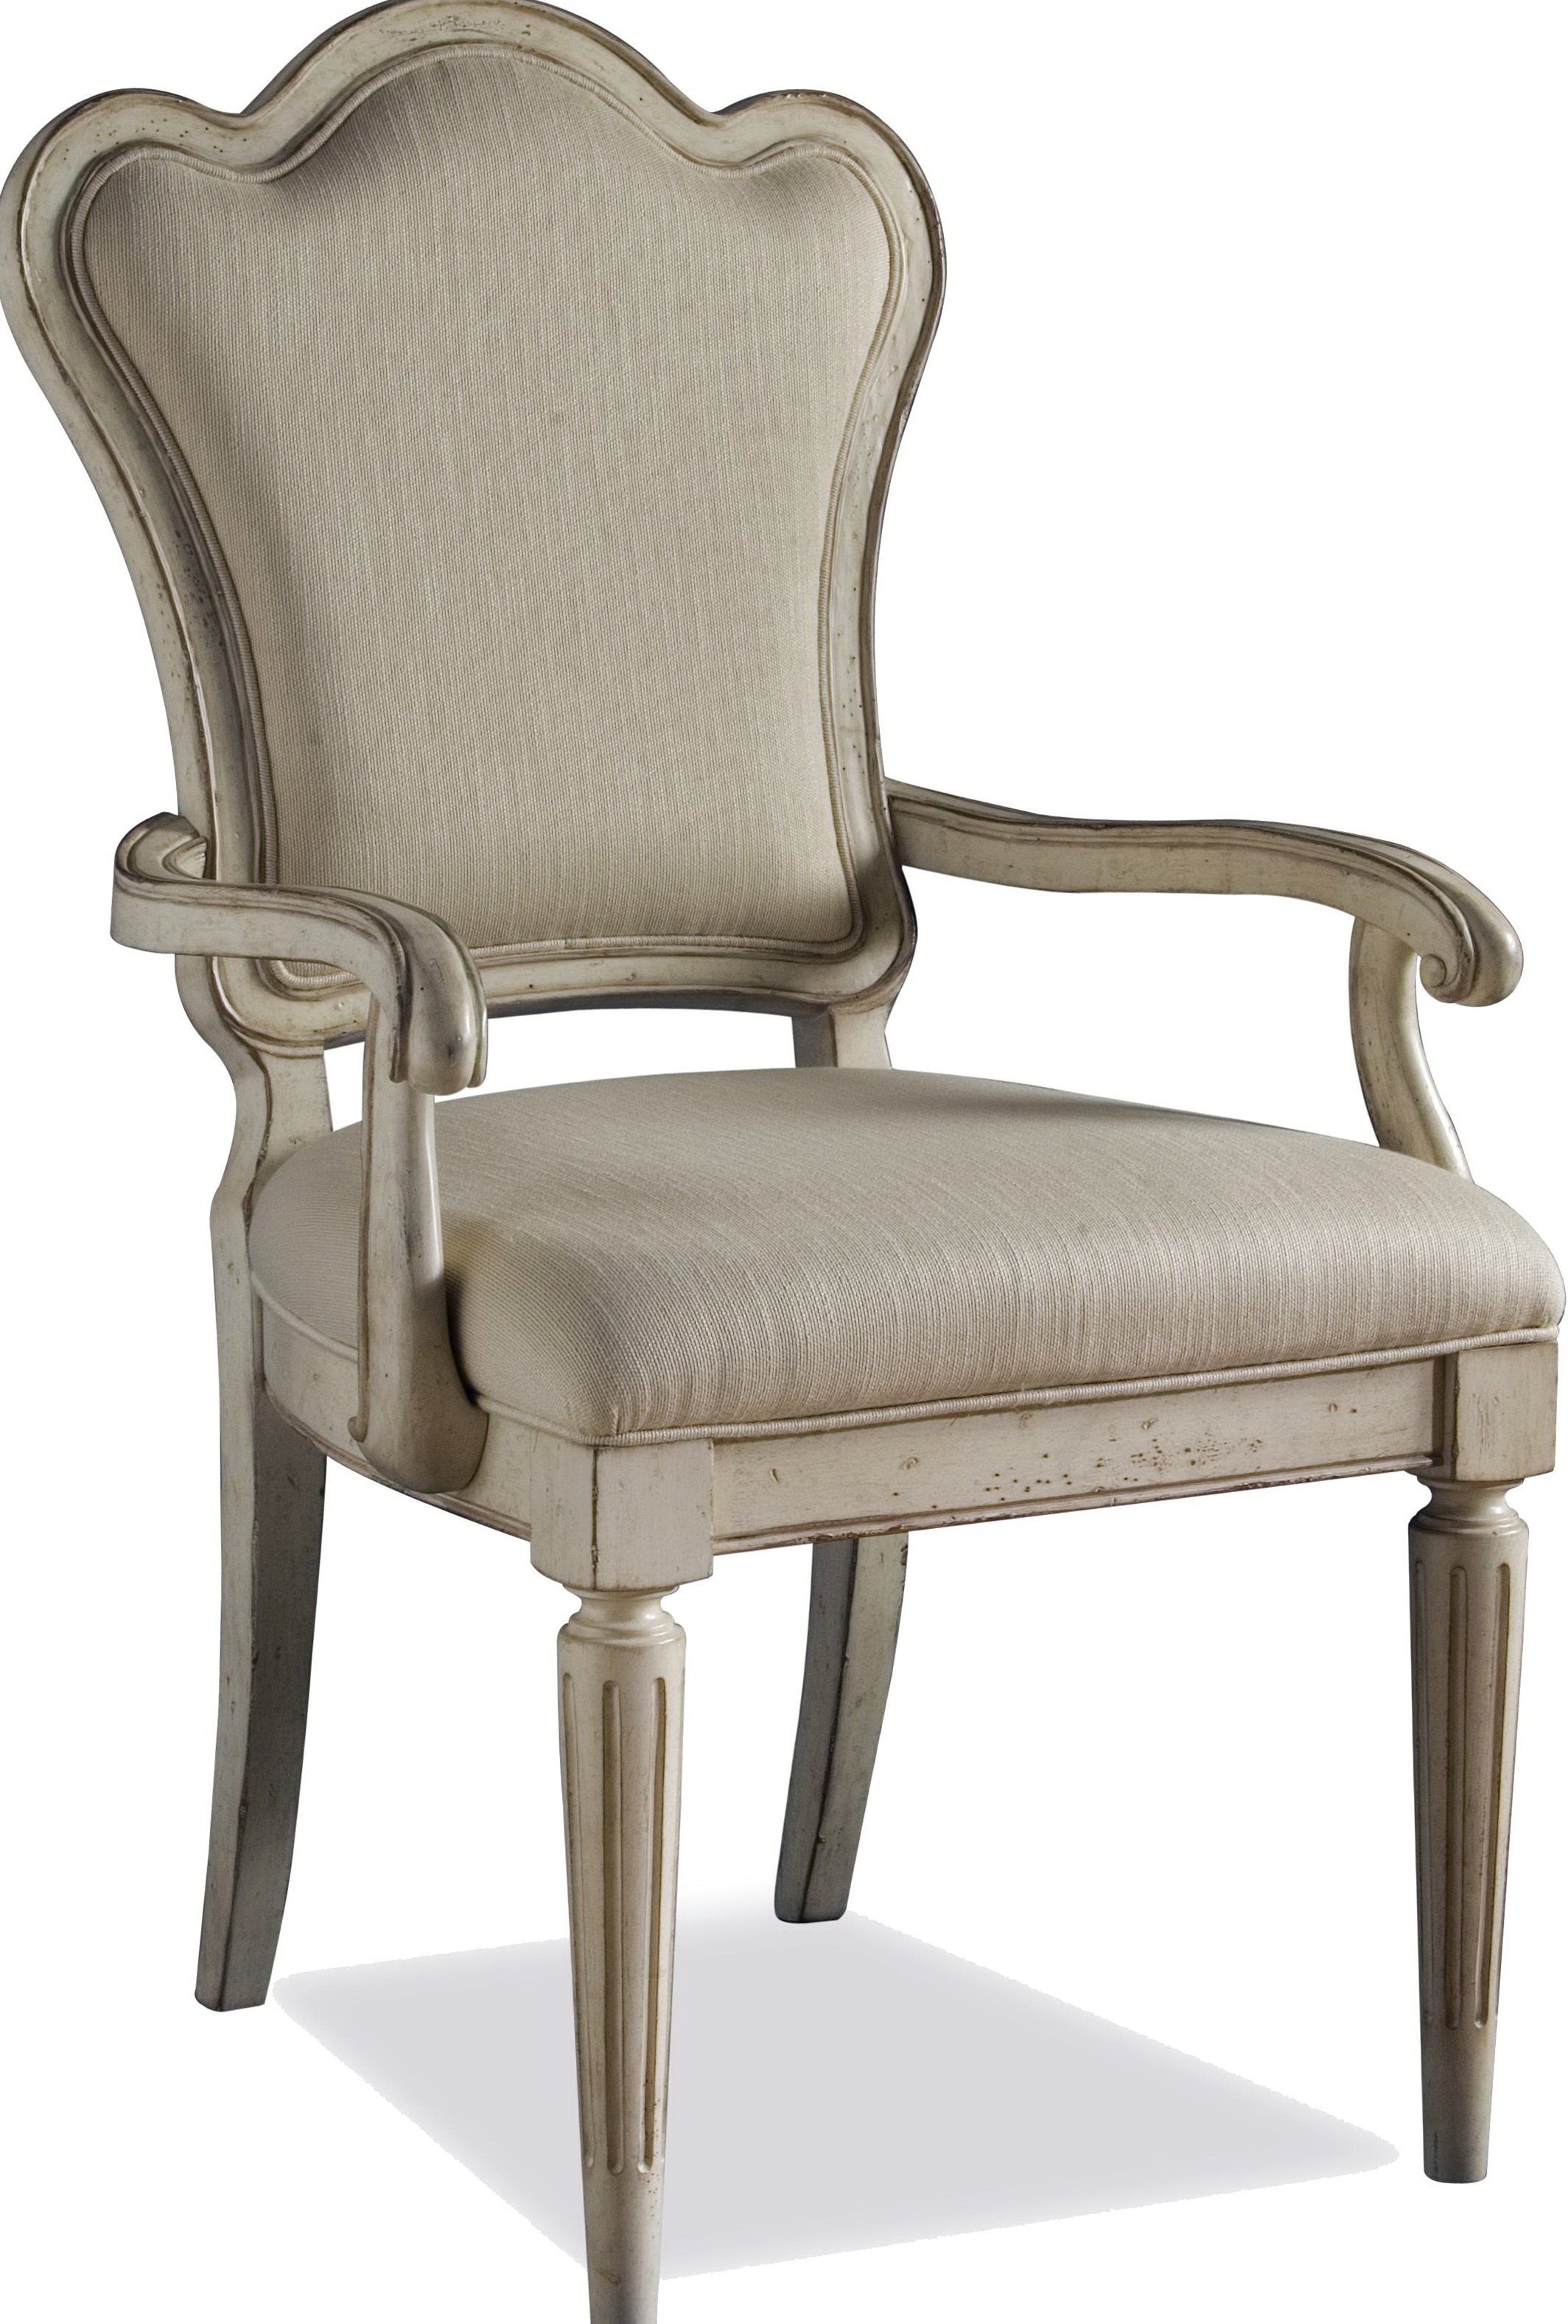 Upholstered Dining Room Chairs With Arms